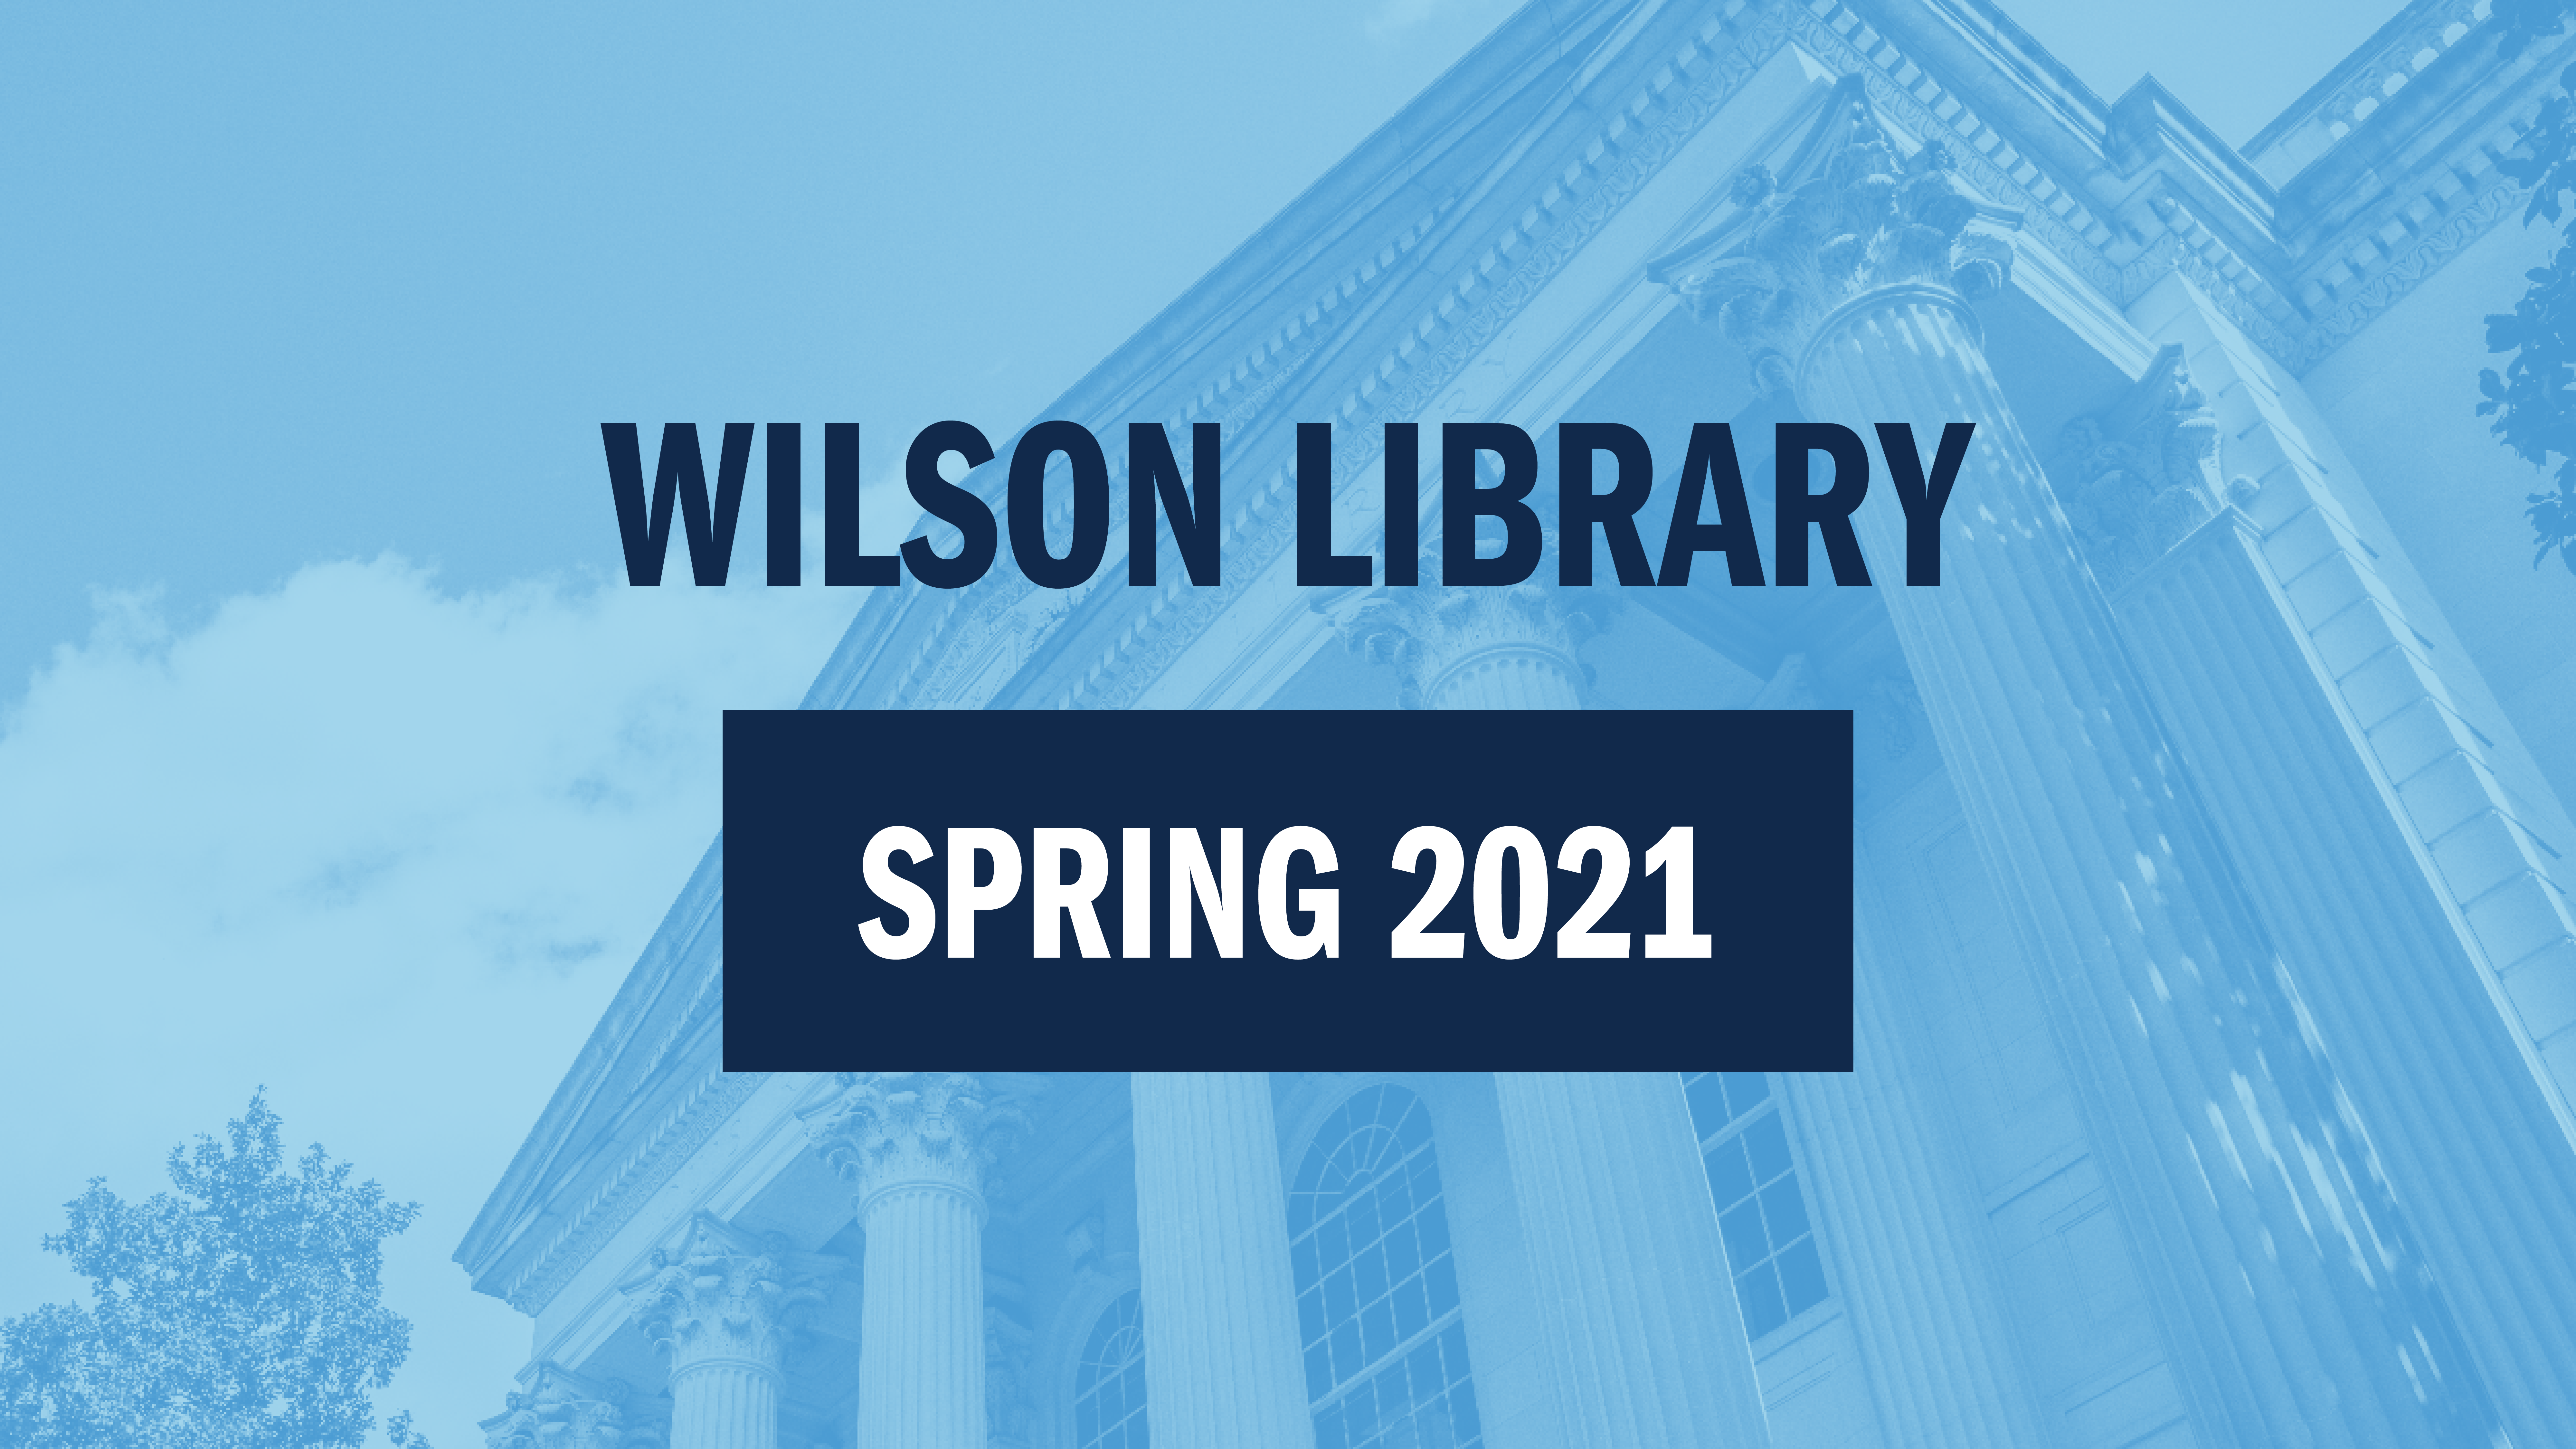 Access Special Collections in Spring 2021